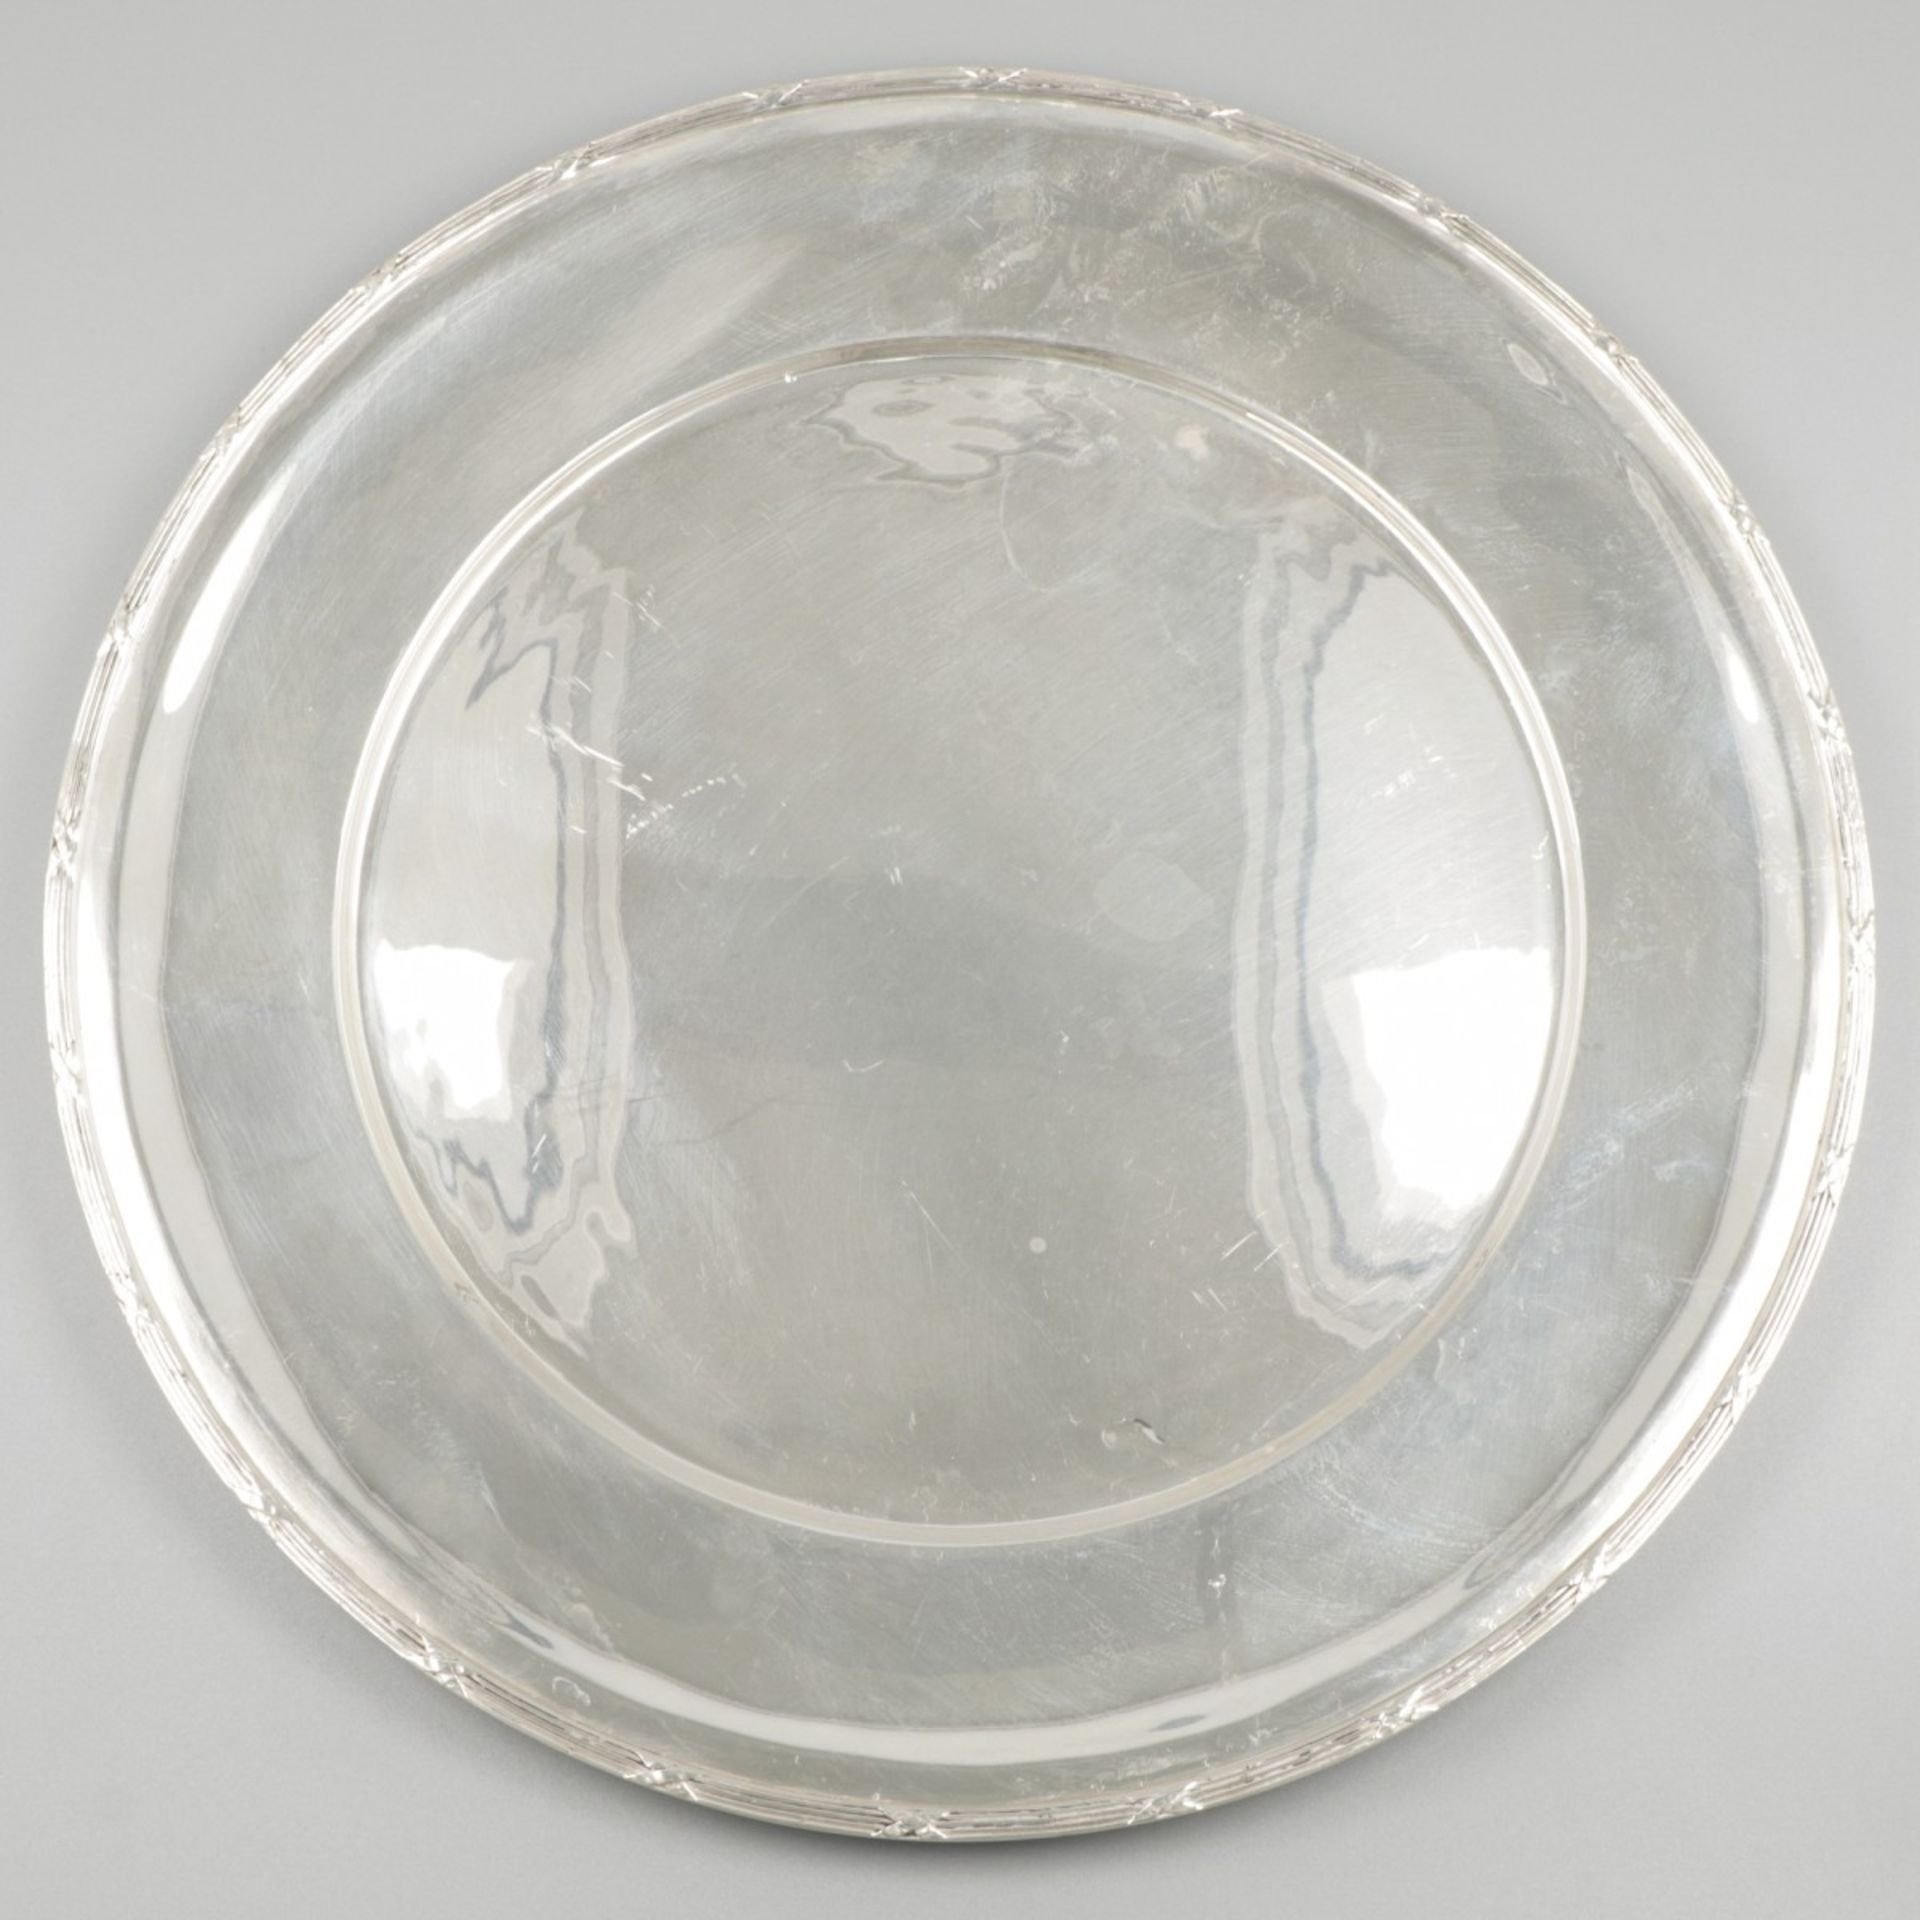 2-piece set of silver plates. - Image 2 of 6